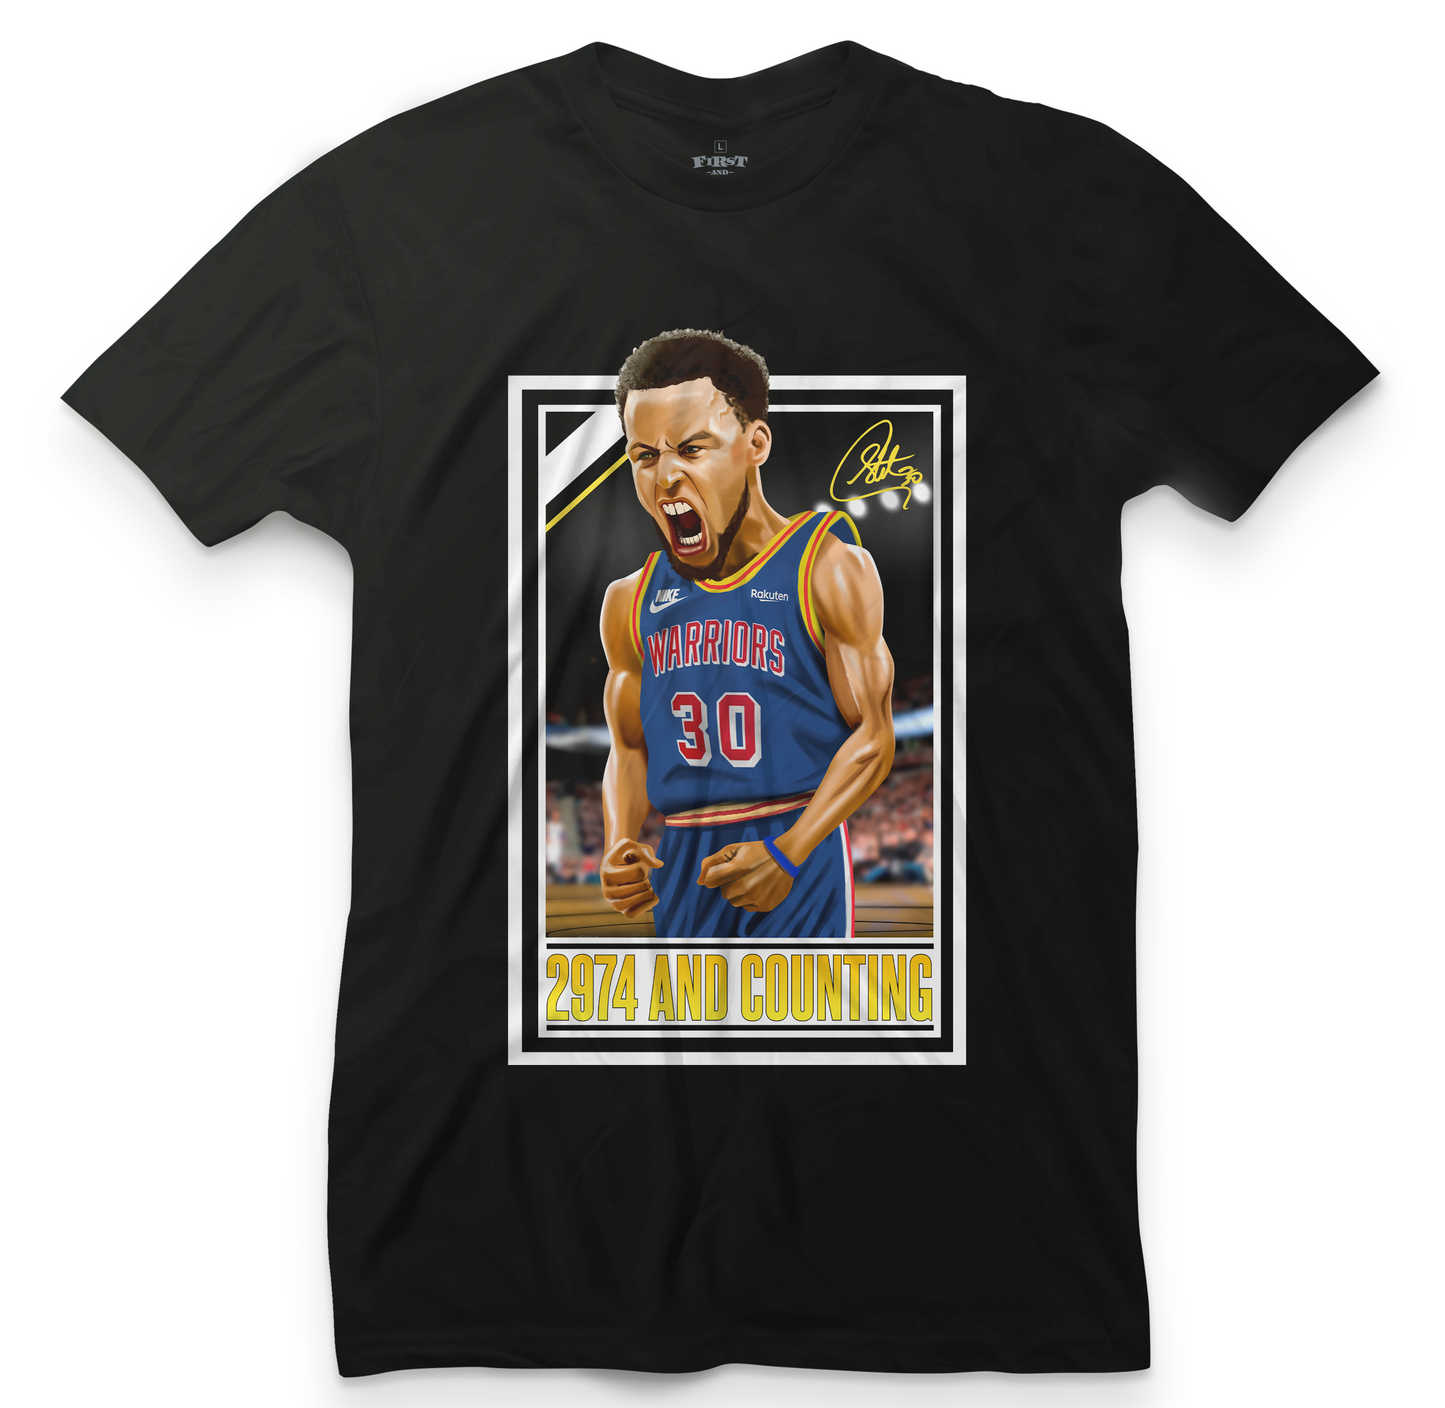 Stephen Curry 2974 And Counting Tee